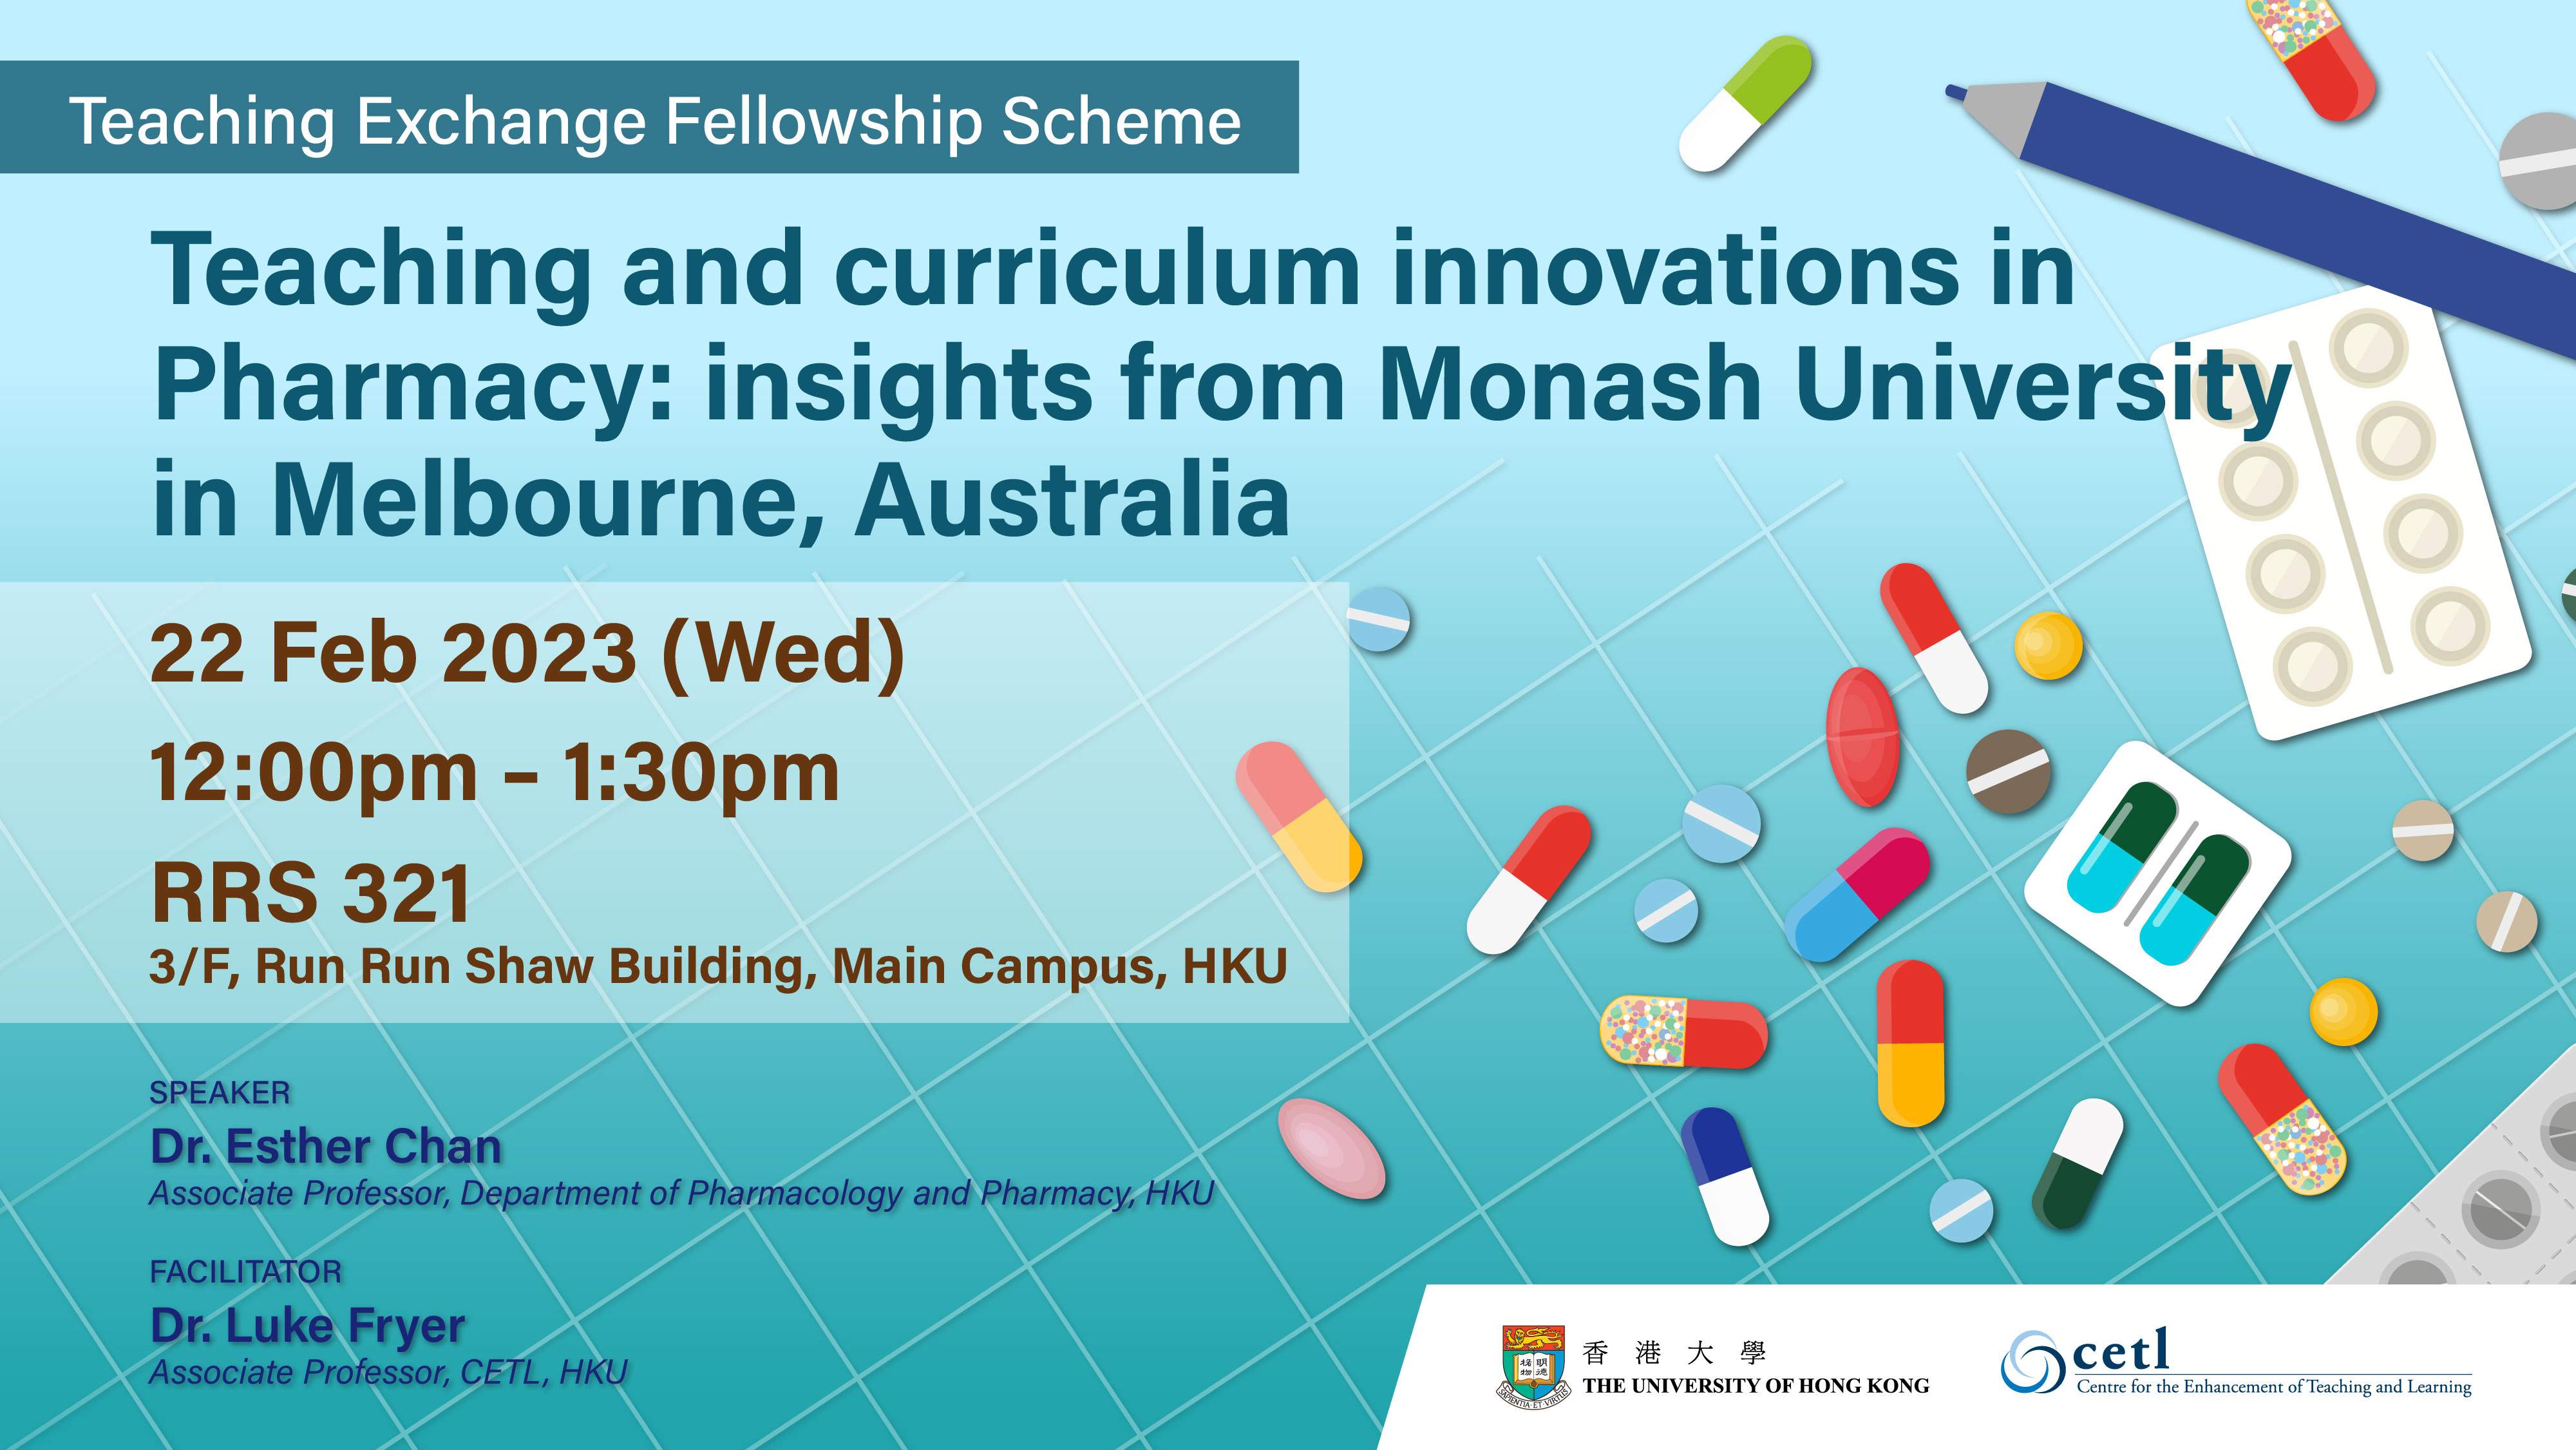 Teaching and curriculum innovations in Pharmacy: insights from Monash University in Melbourne, Australia